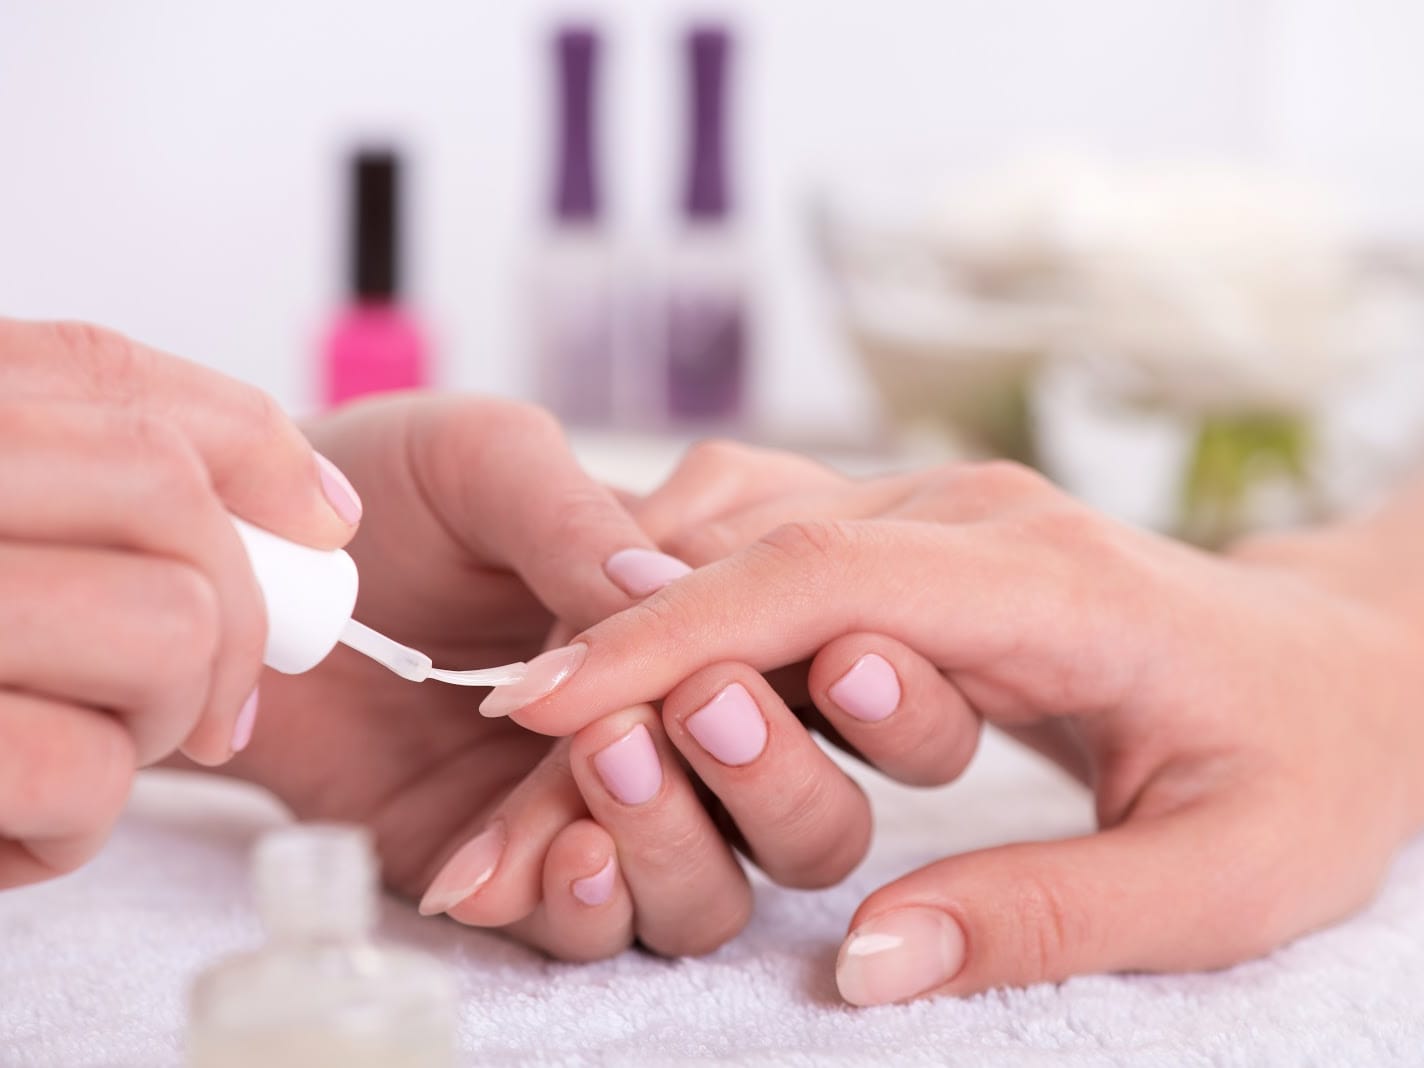 Classic Mani - Pedi for 2 Sessions at Le Posh Wellness - Get Deals, Cashback and Rewards with ShopBack GO